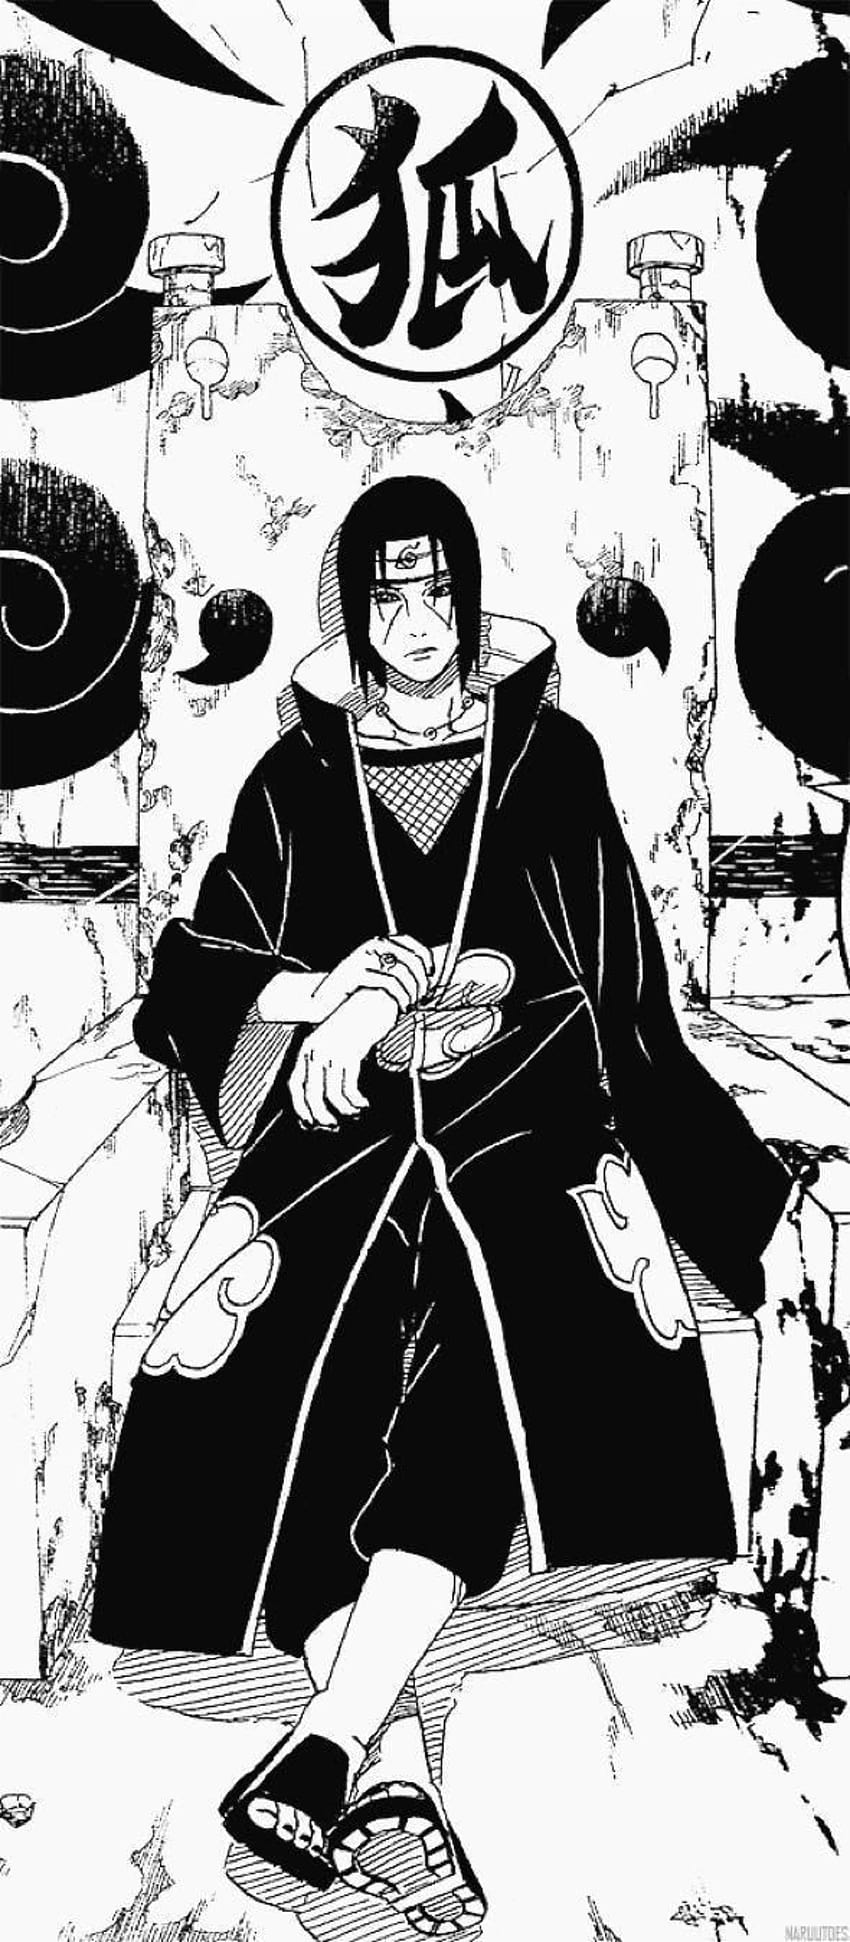 Itachi on the throne. One of the most cool looking poses Ive seen from one of the best characters., itachi sitting HD phone wallpaper